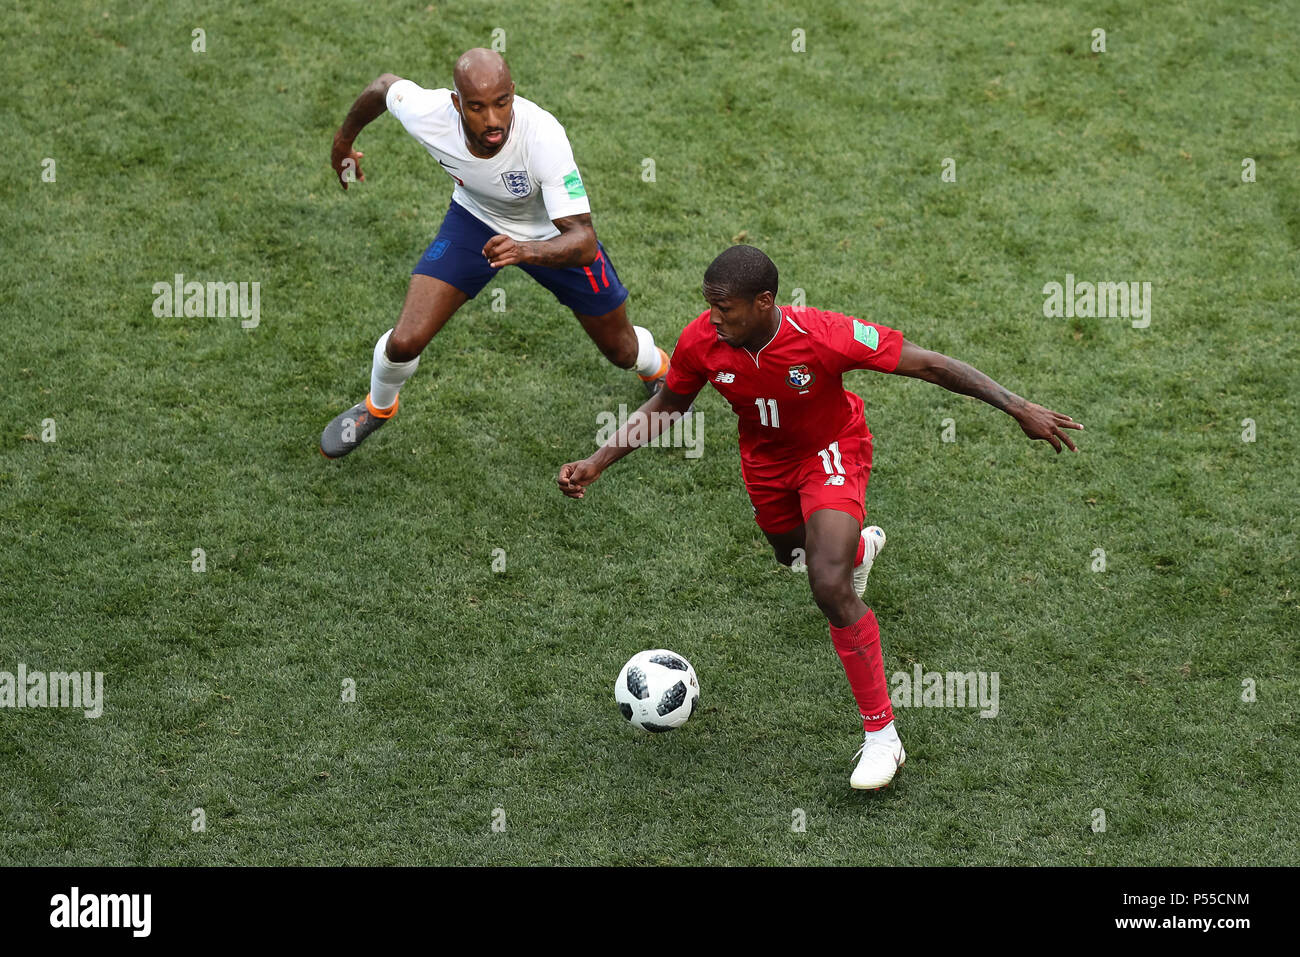 Fabian Delph of England and Armando Cooper of Panama during the 2018 FIFA World Cup Group G match between England and Panama at Nizhny Novgorod Stadium on June 24th 2018 in Nizhny Novgorod, Russia. (Photo by Daniel Chesterton/phcimages.com) Stock Photo